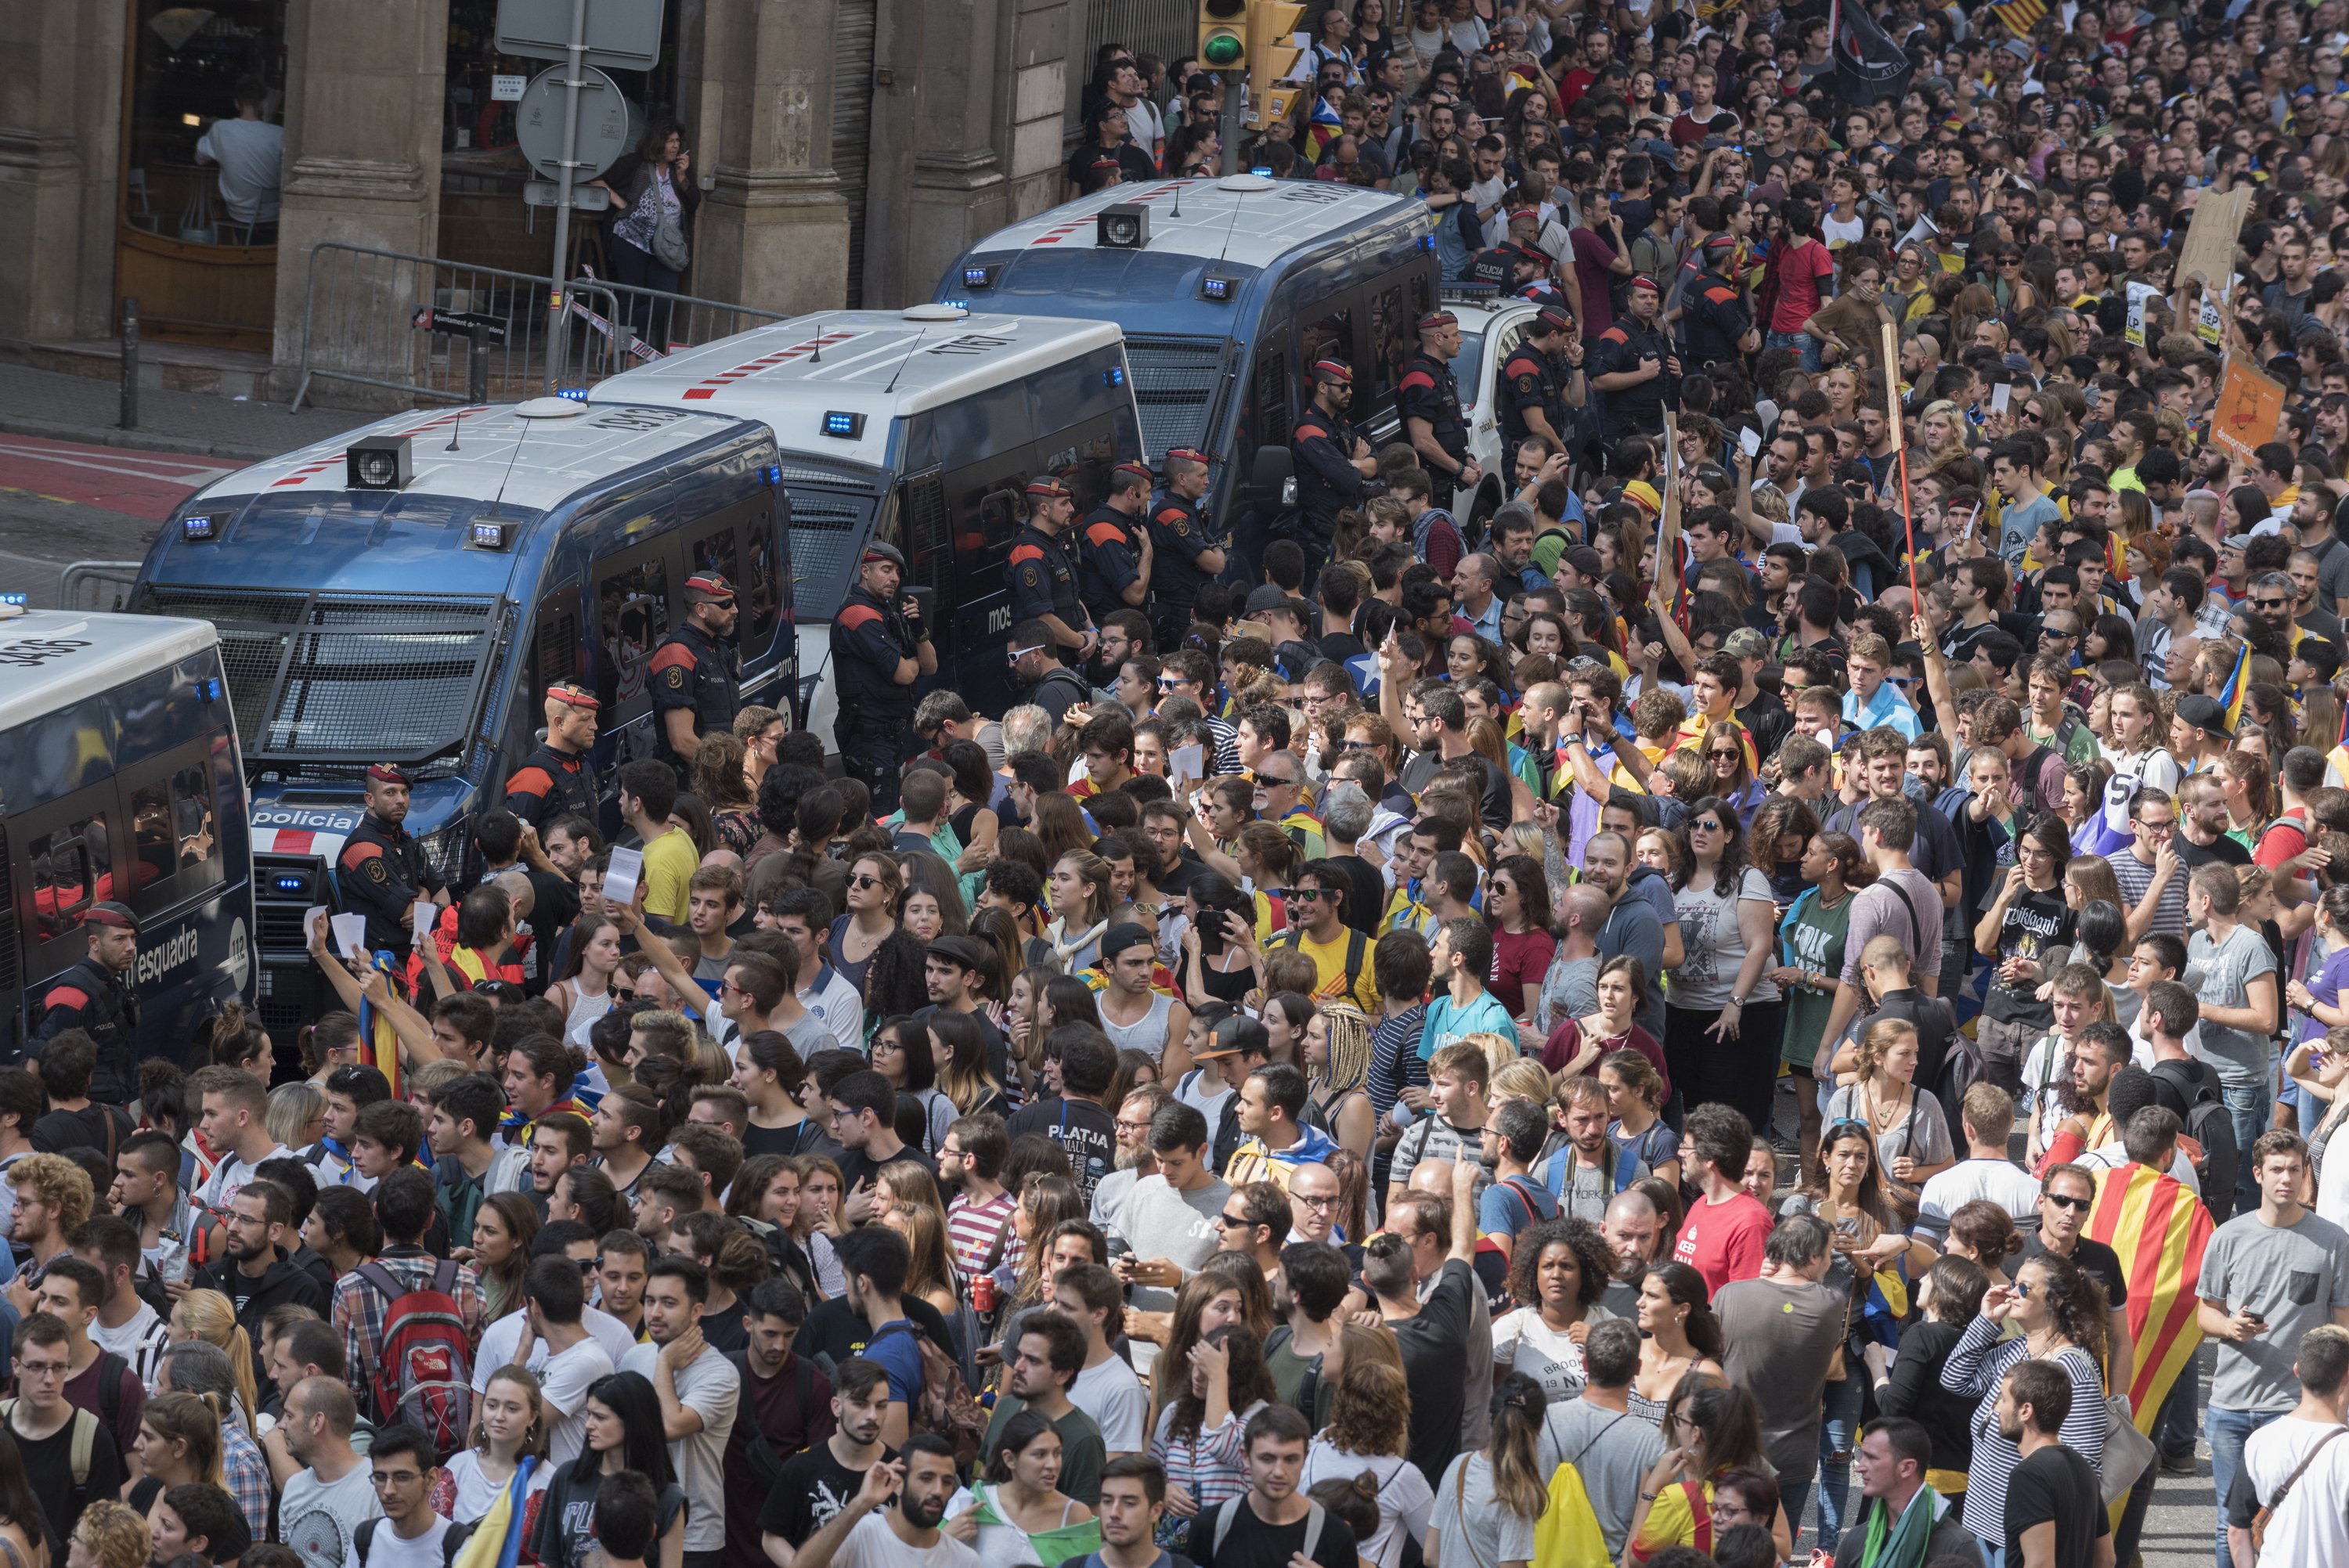 Call for withdrawal of Spanish police forces overflows streets of Catalonia